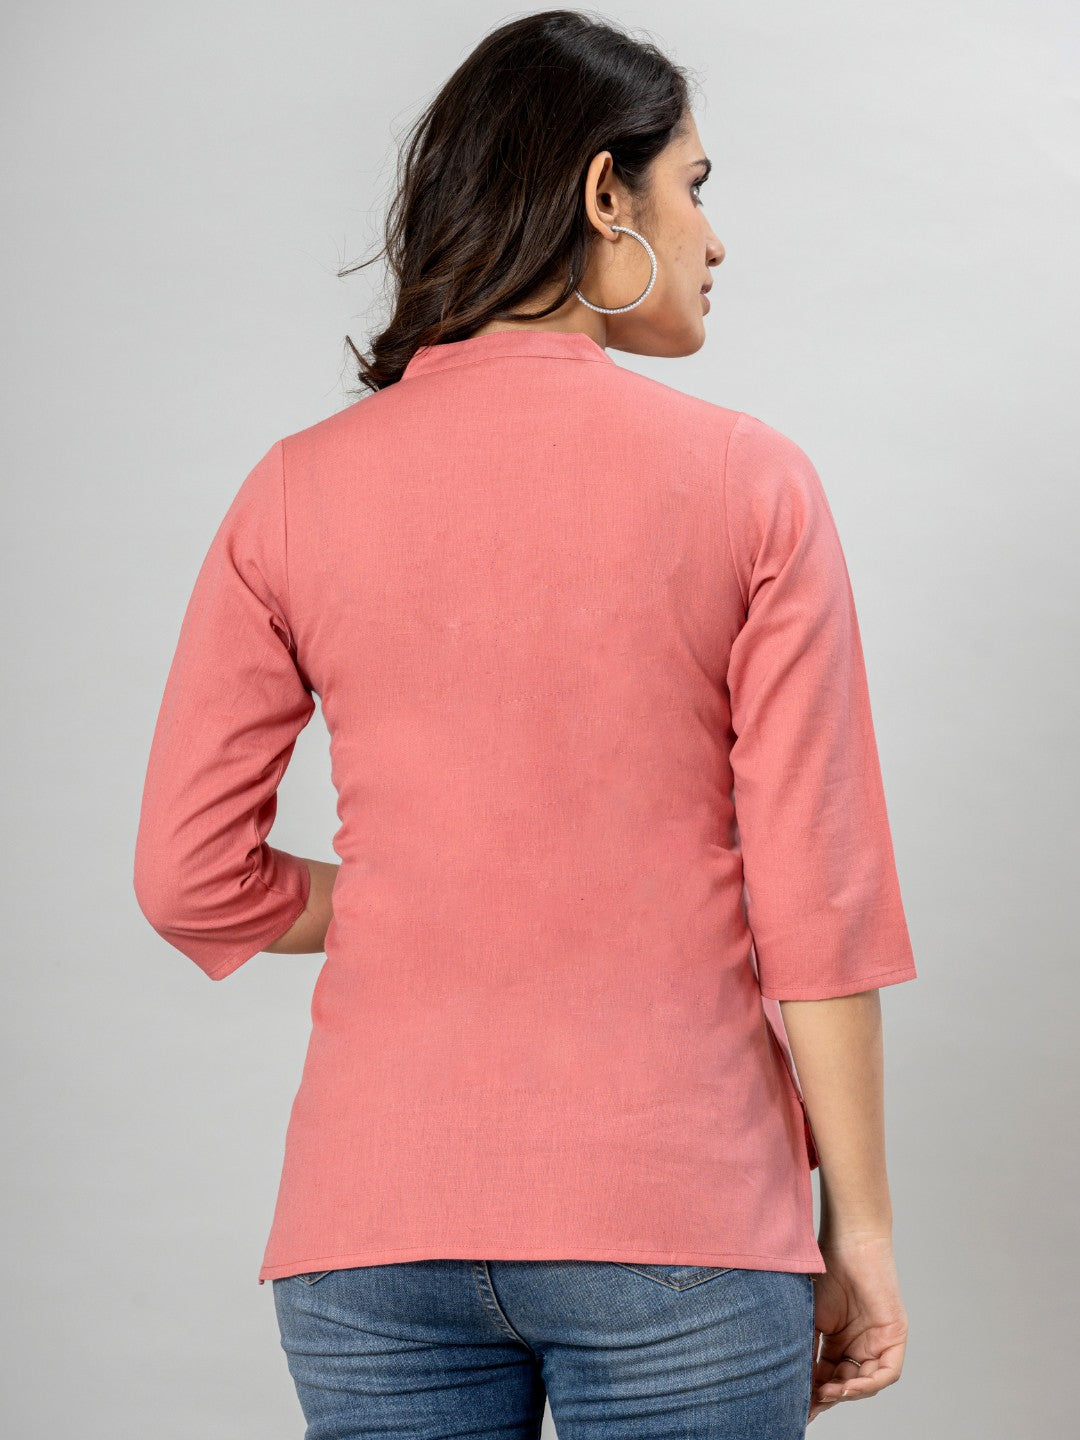 Solid Cotton Flax Women Top - Peach